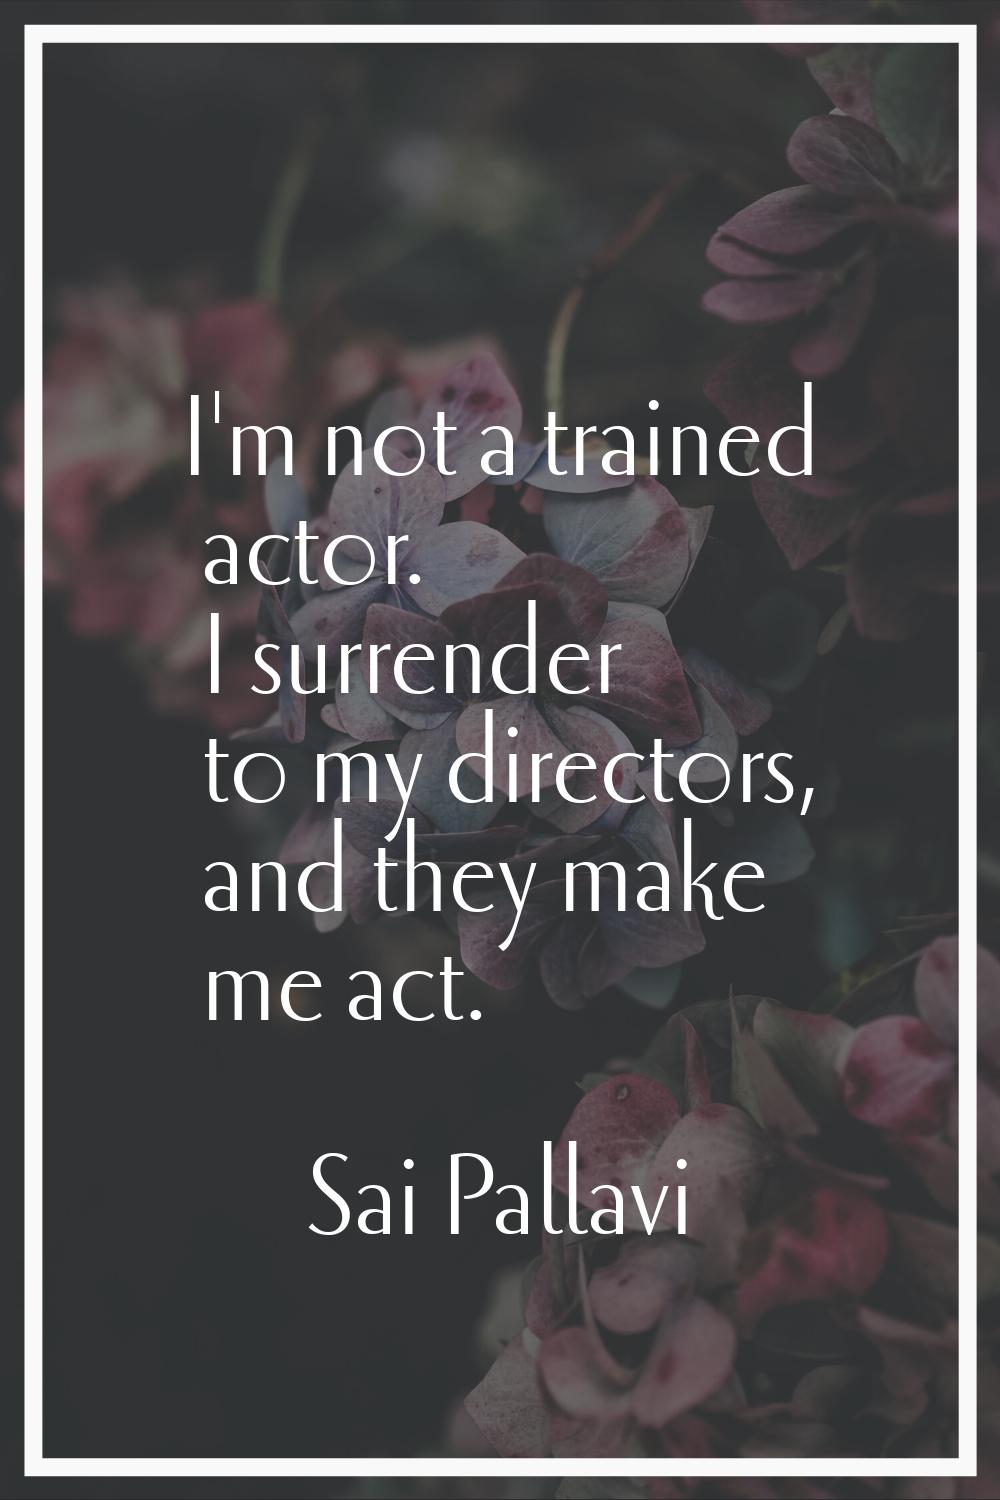 I'm not a trained actor. I surrender to my directors, and they make me act.